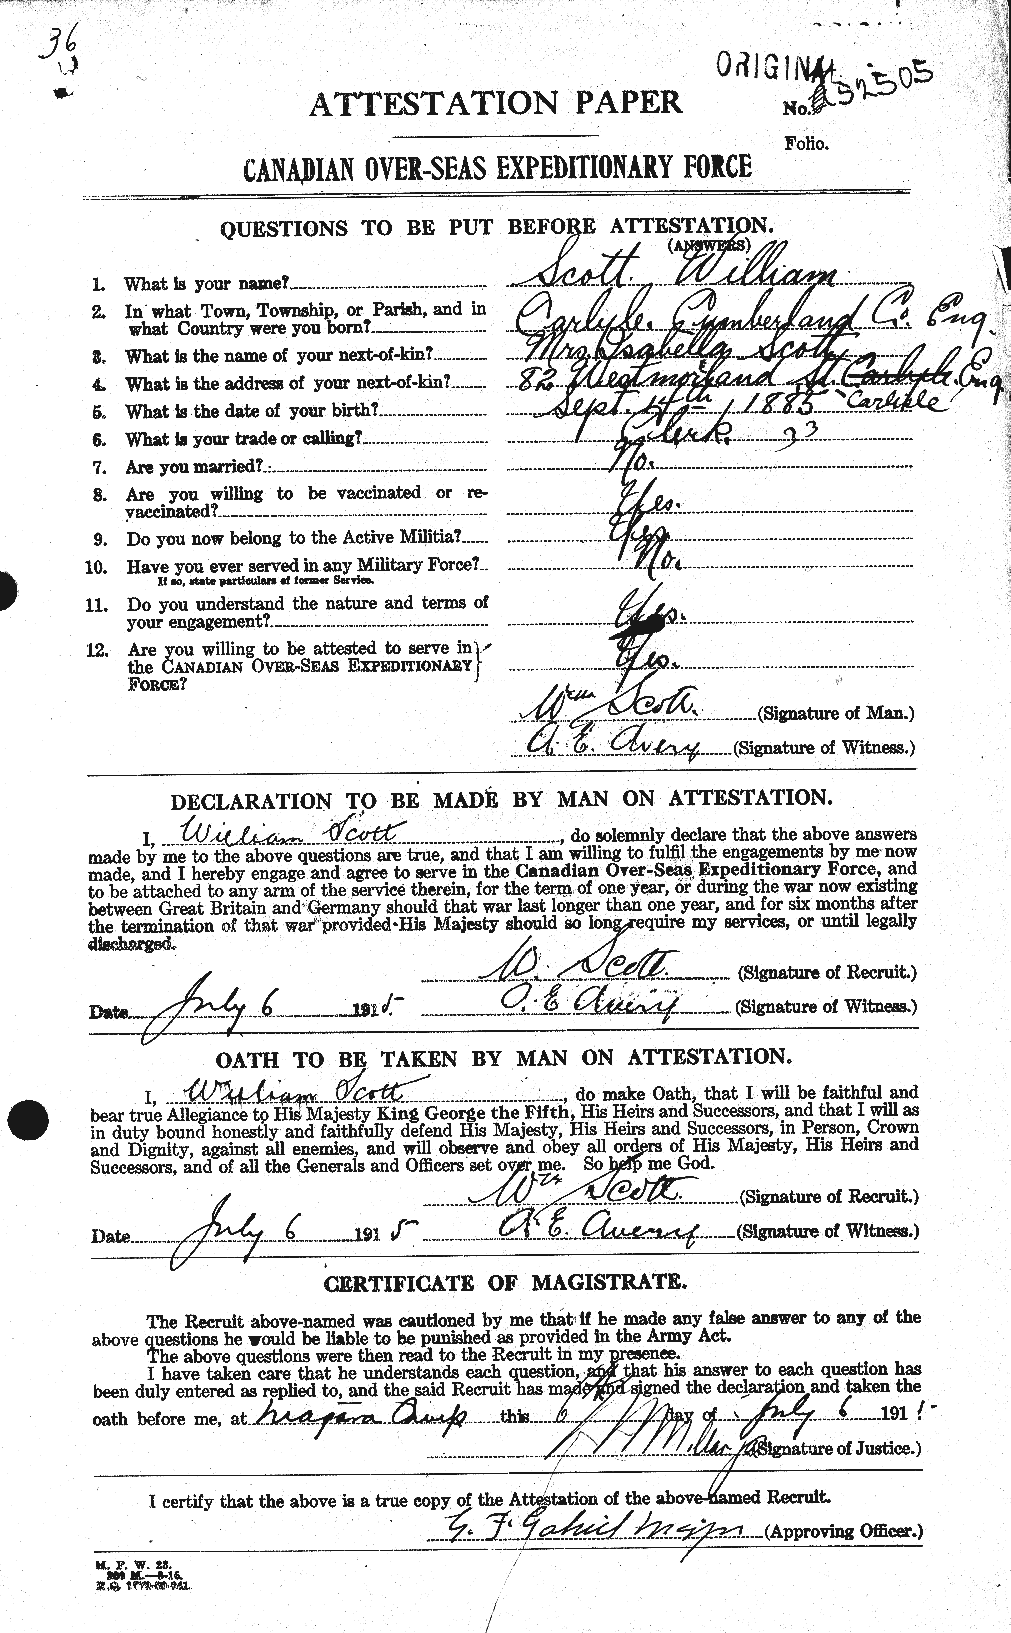 Personnel Records of the First World War - CEF 087352a